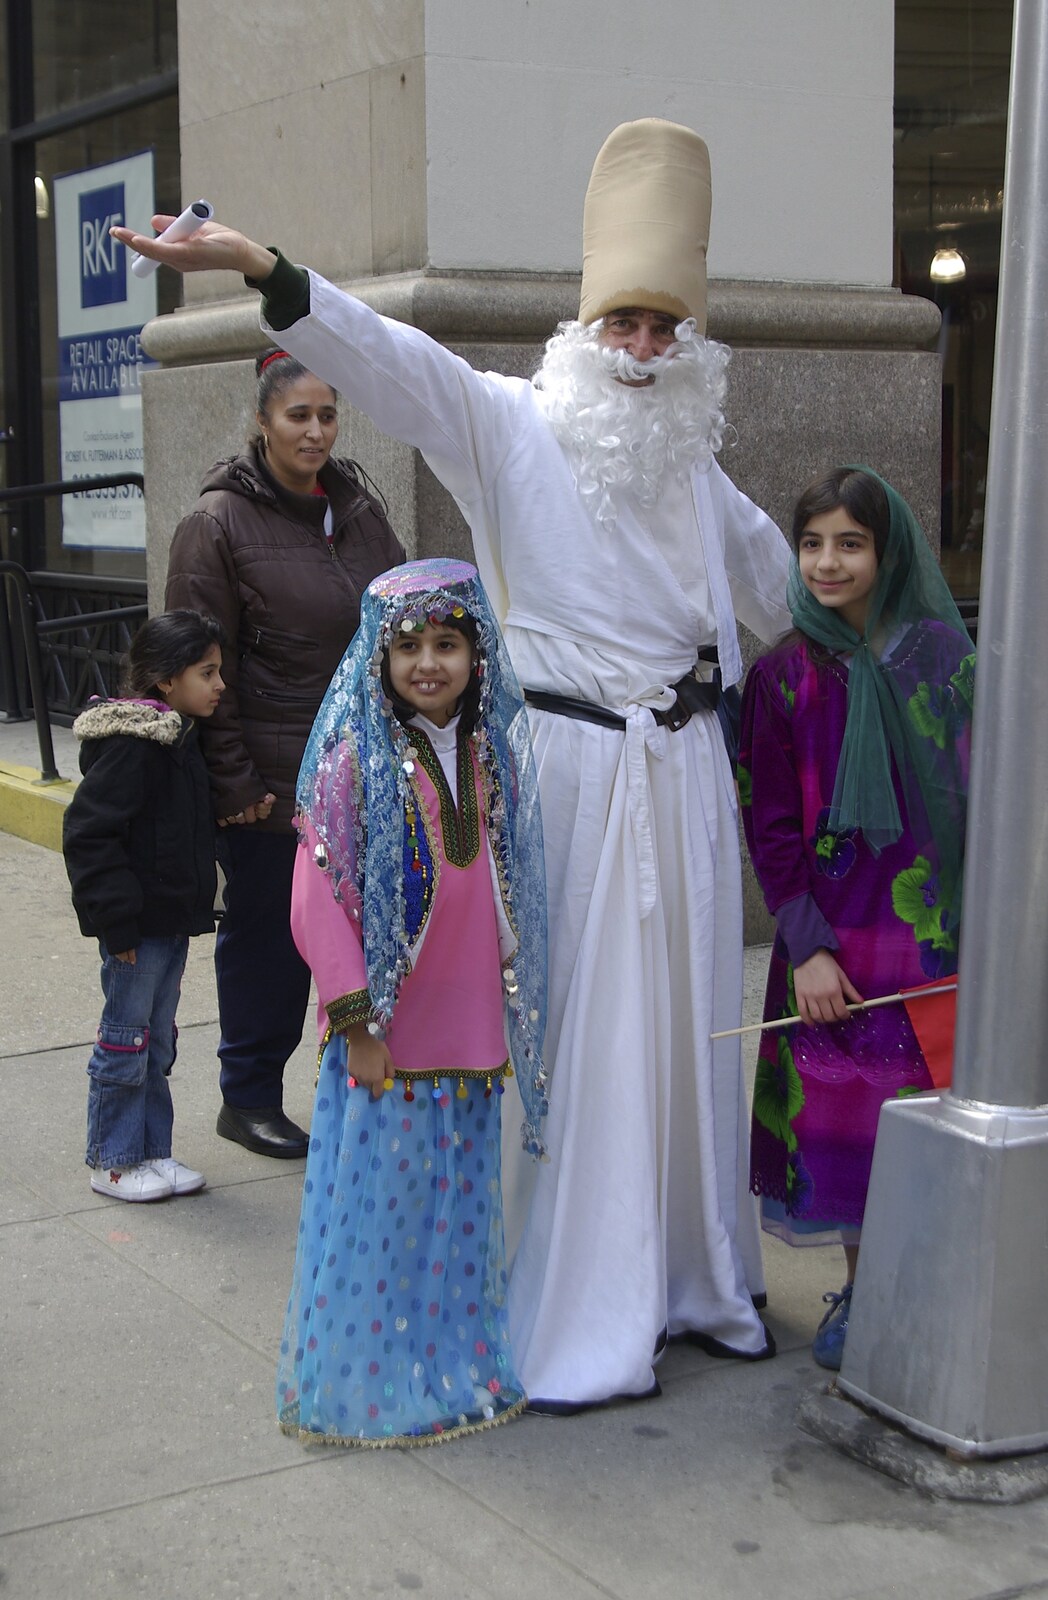 Persian Day Parade, Upper East Side and Midtown, New York, US - 25th March 2007: Another fake beard